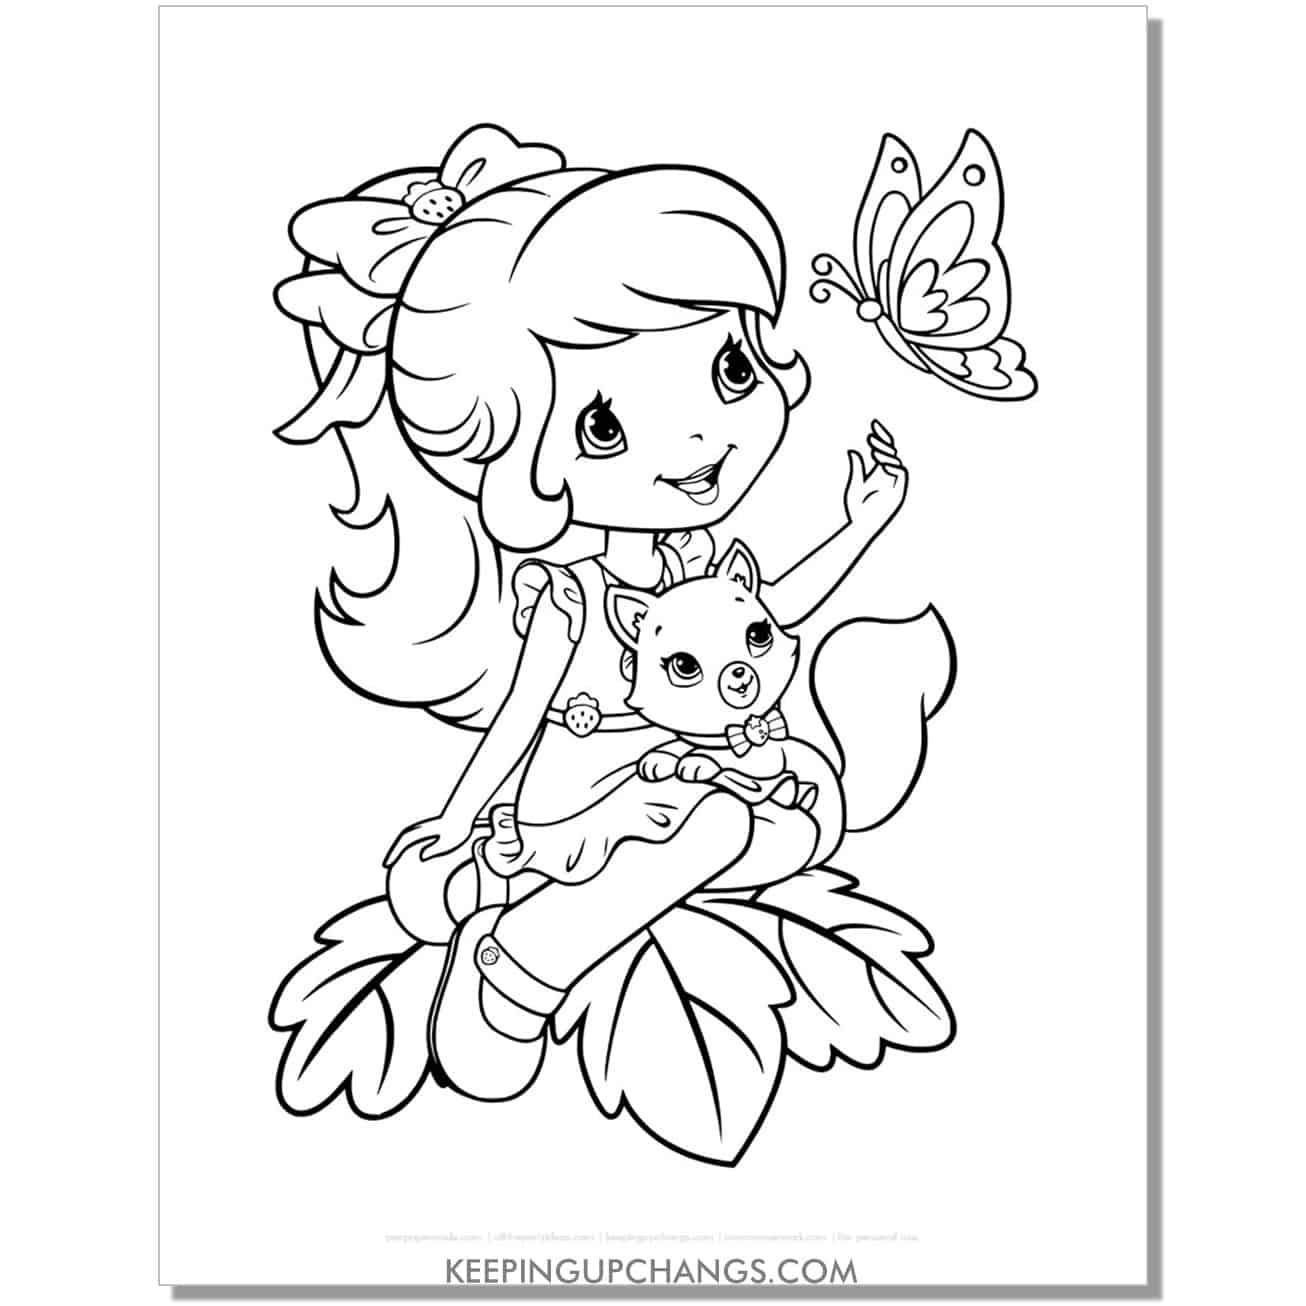 free strawberry shortcake and cat custard with butterfly coloring page, sheet.